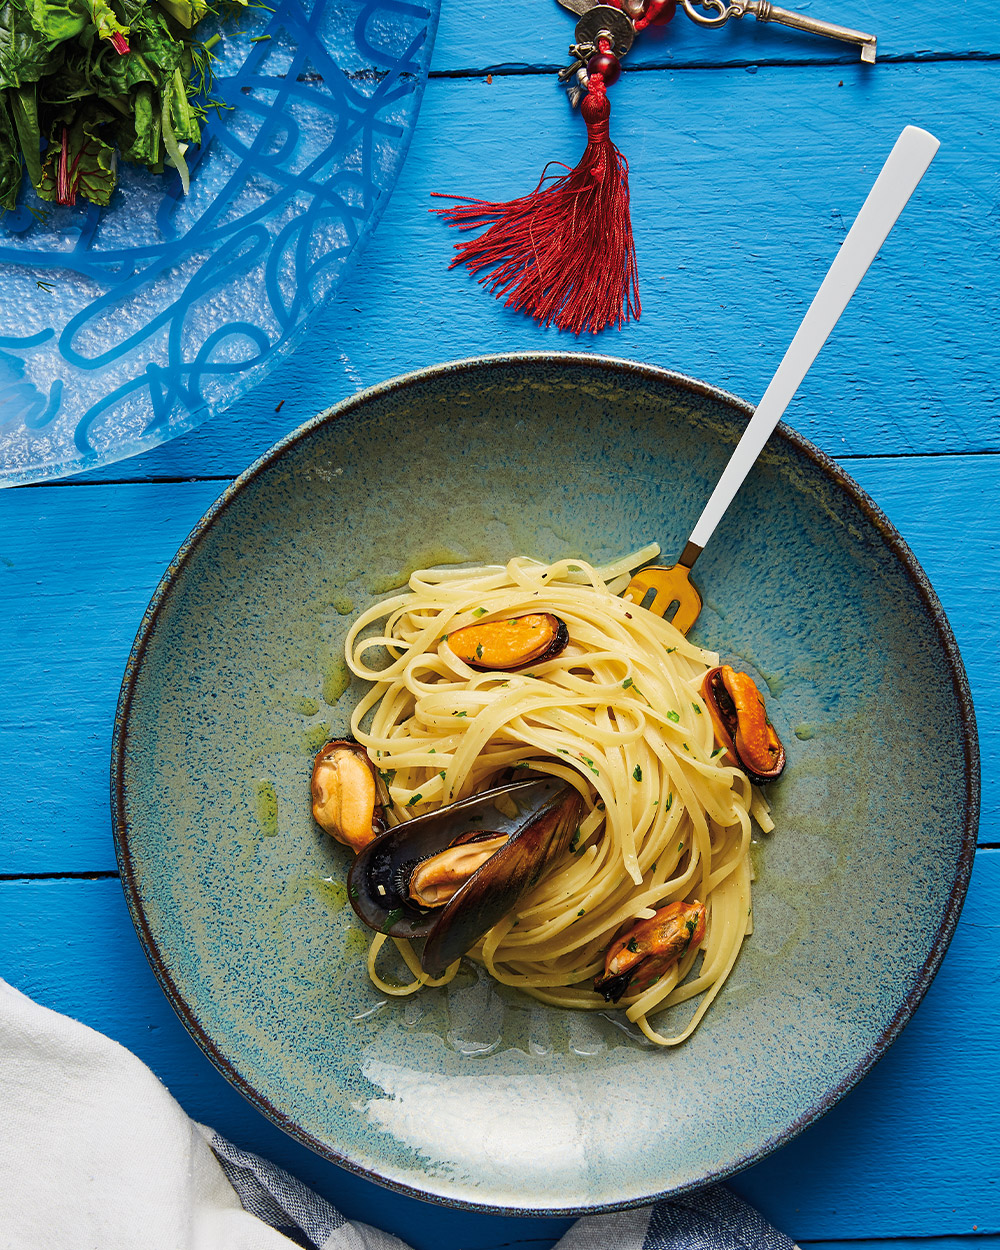 Linguine with mussels on plate ready to eat